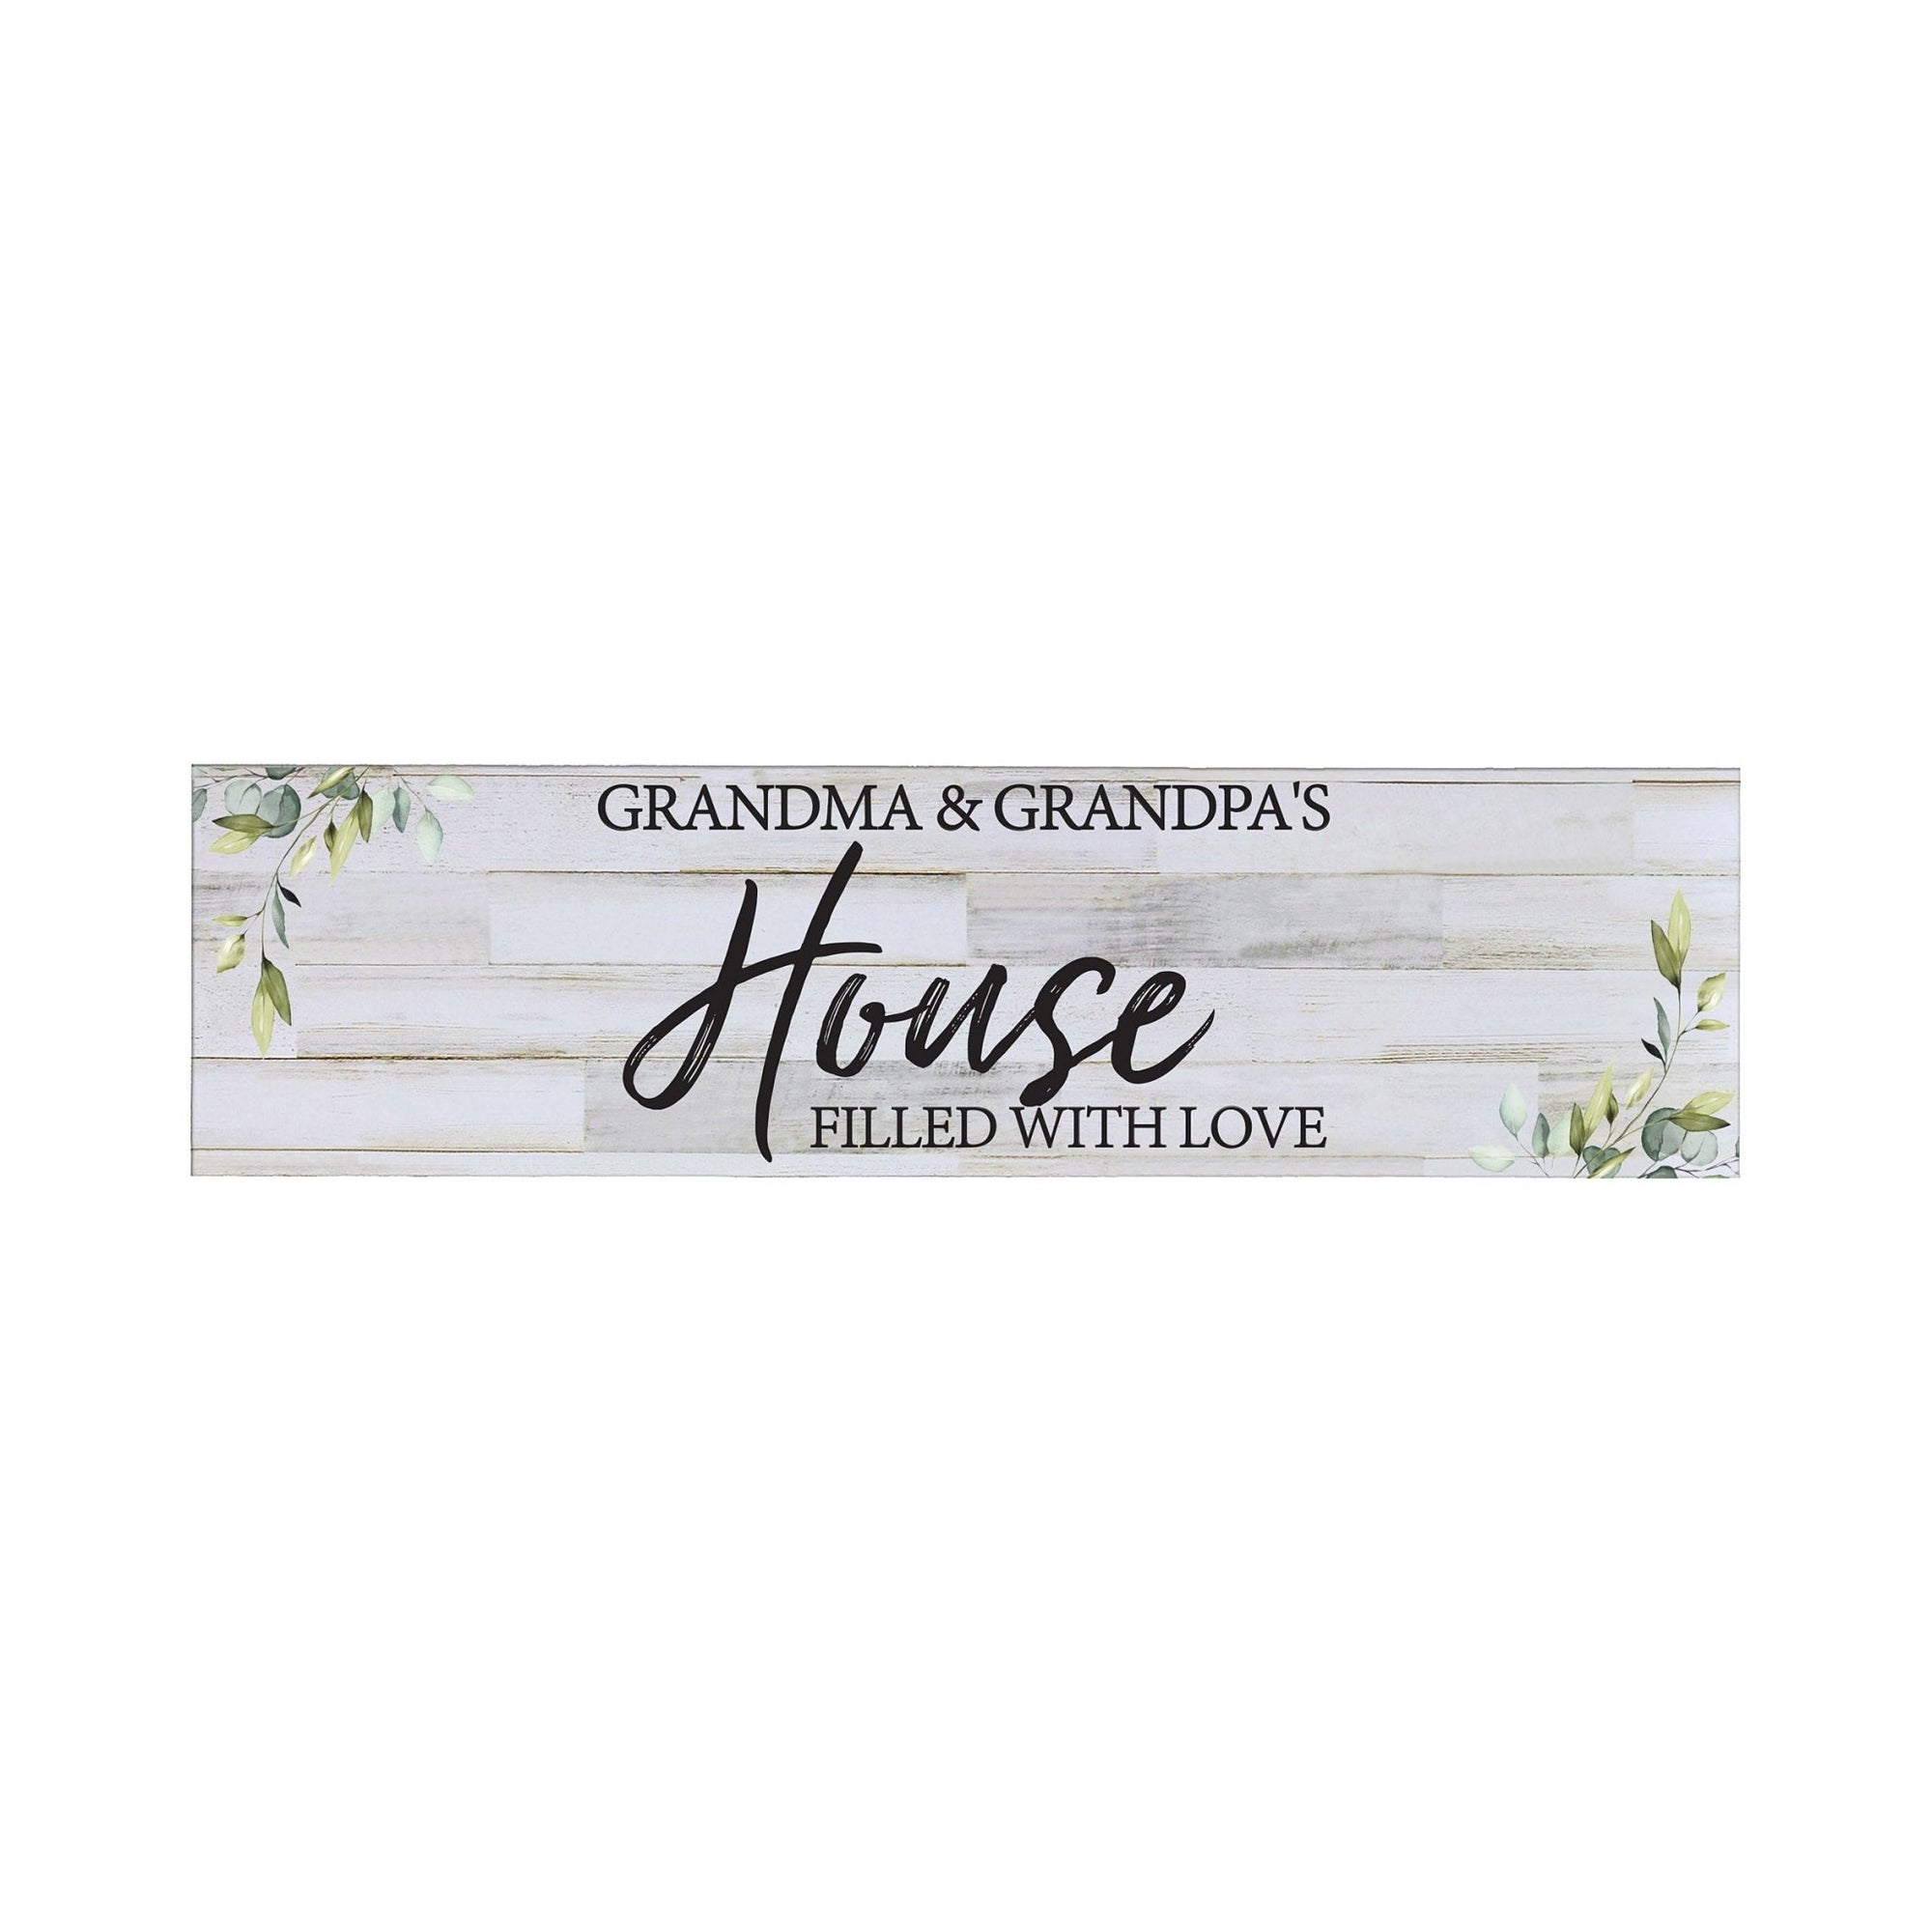 Inspirational Wooden Wall Plaque For Grandparents 22.5” x 6” - House Filled With Love - LifeSong Milestones